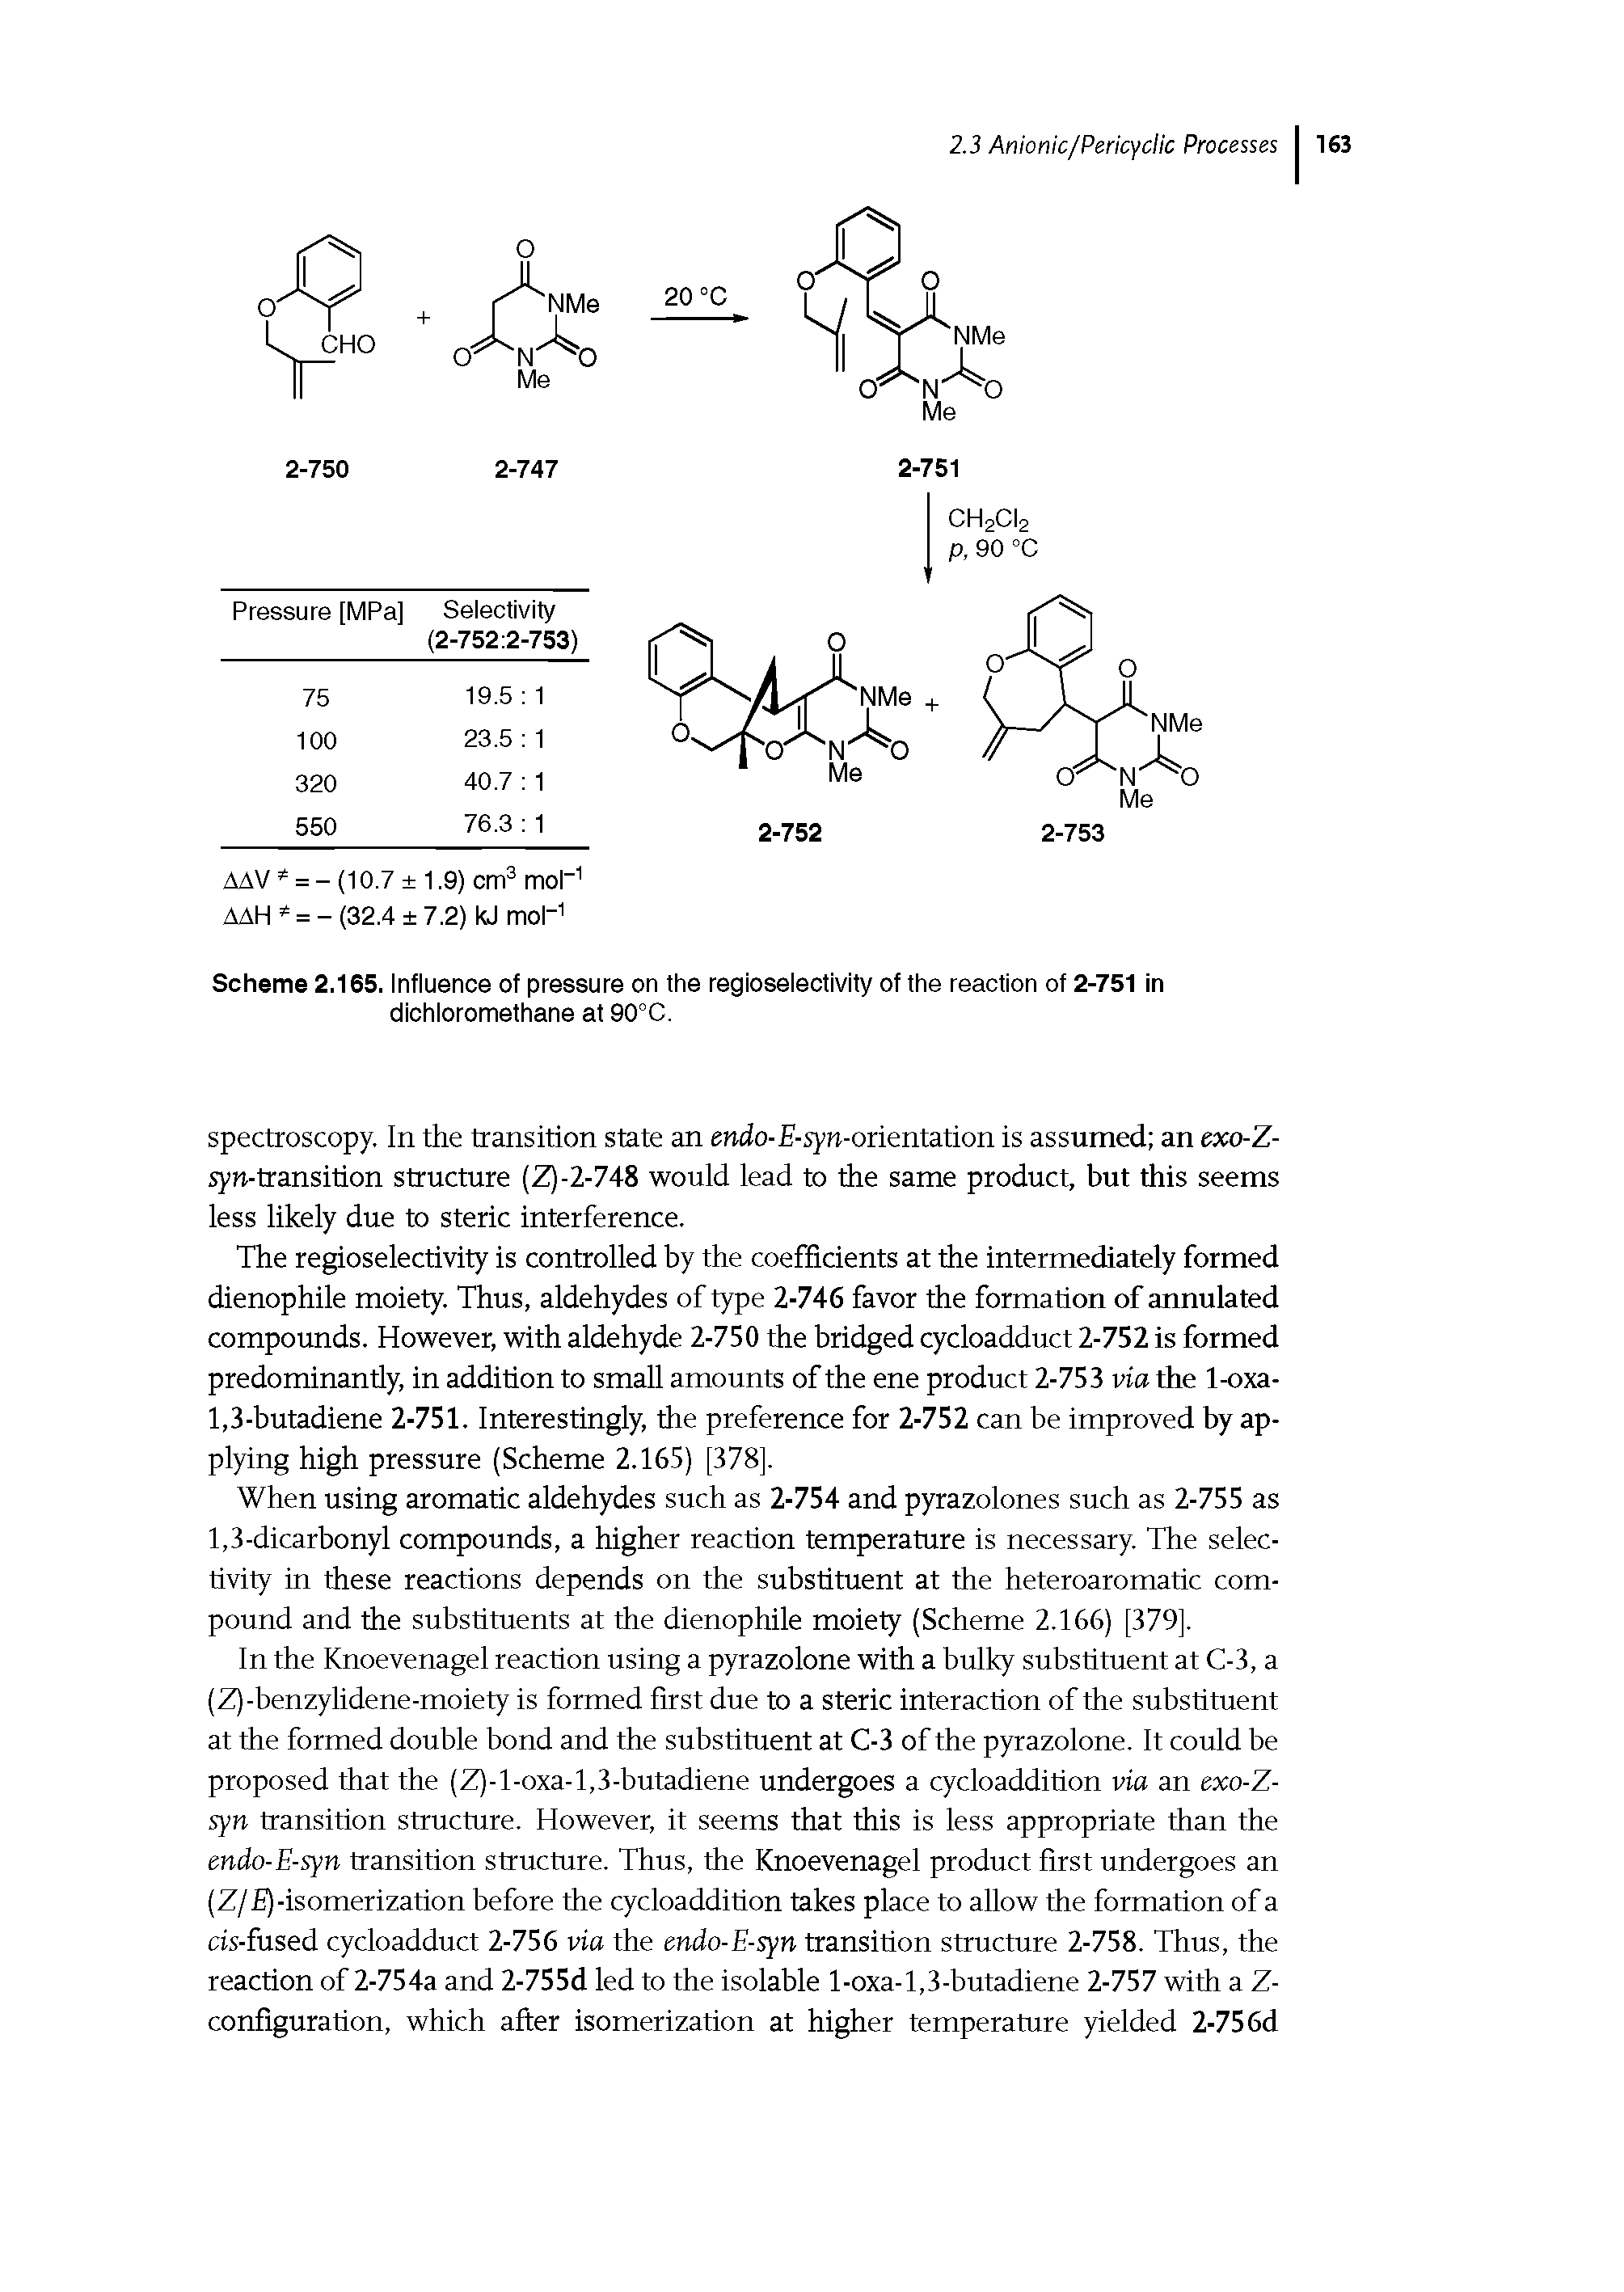 Scheme 2.165. Influence of pressure on the regioselectivity of the reaction of 2-751 in dichloromethane at 90°C.